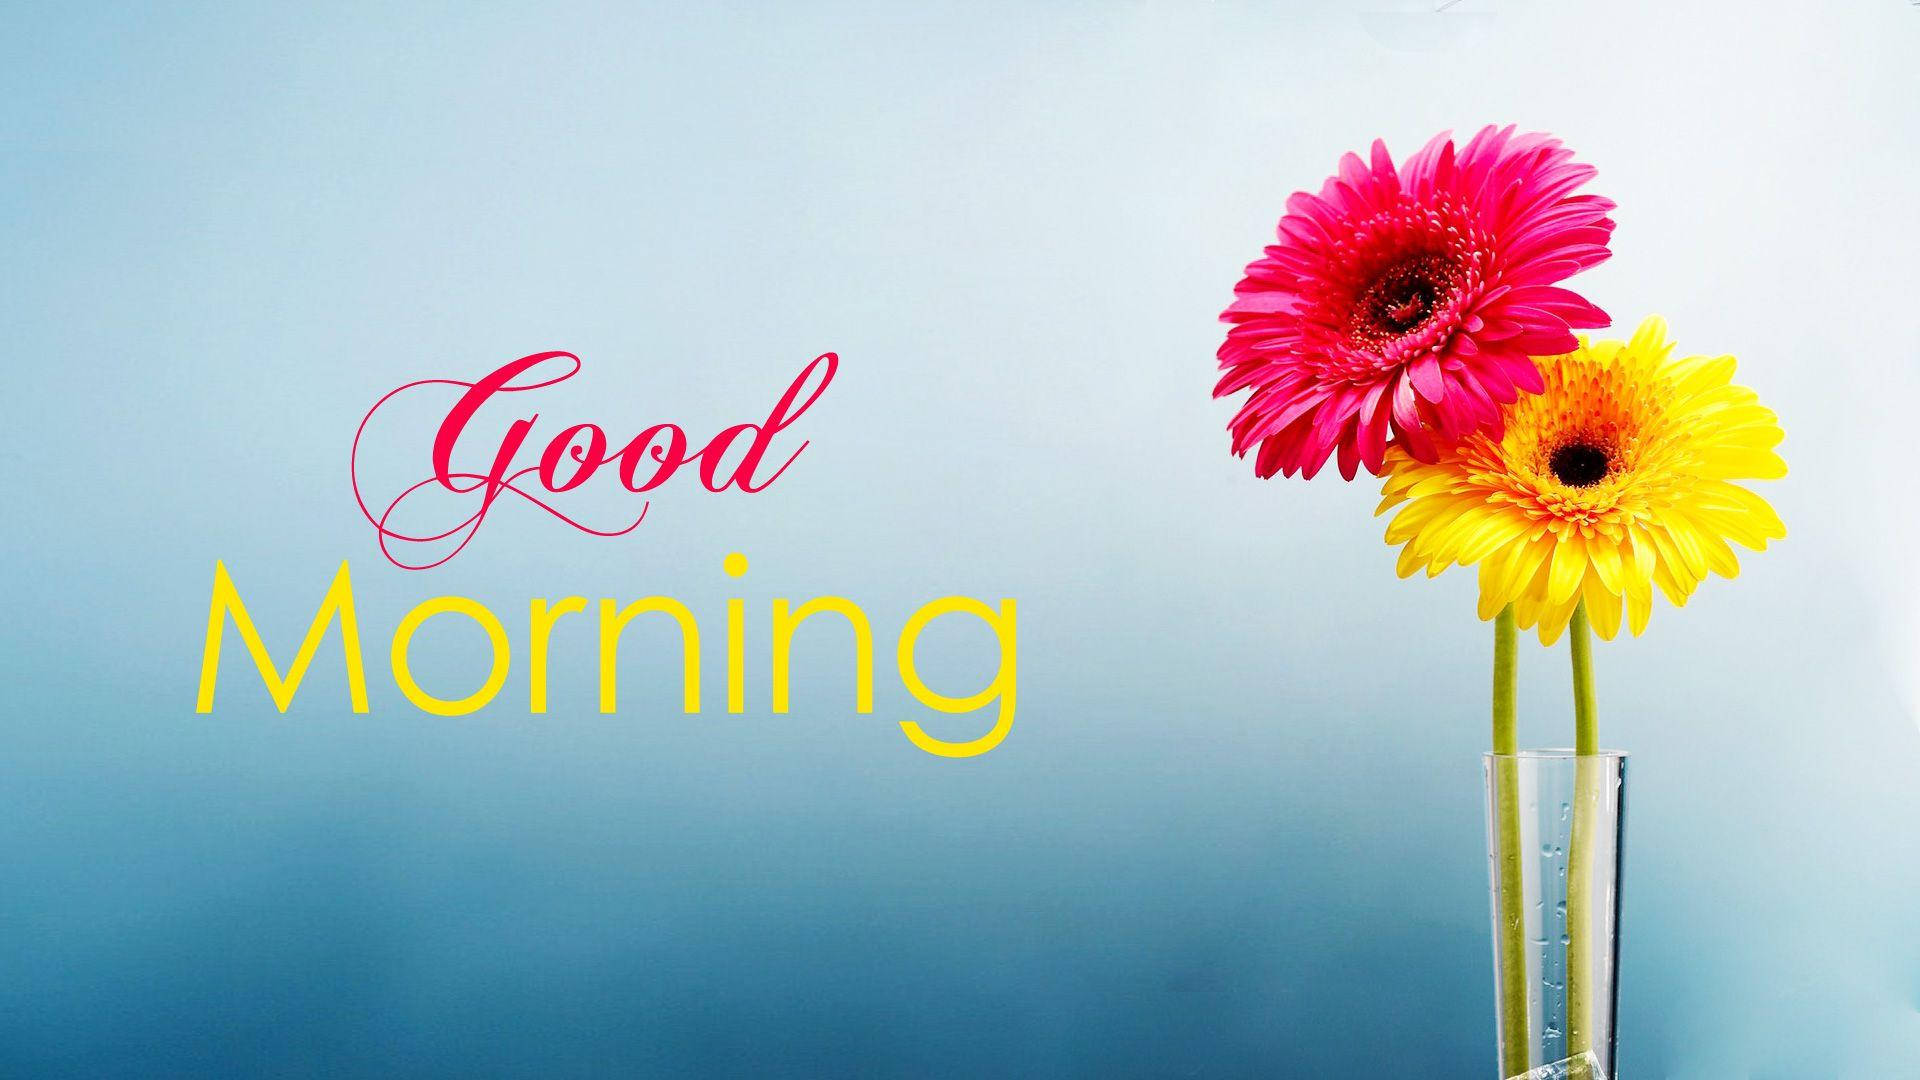 Good Morning Hd With Gerbera Daisies Background